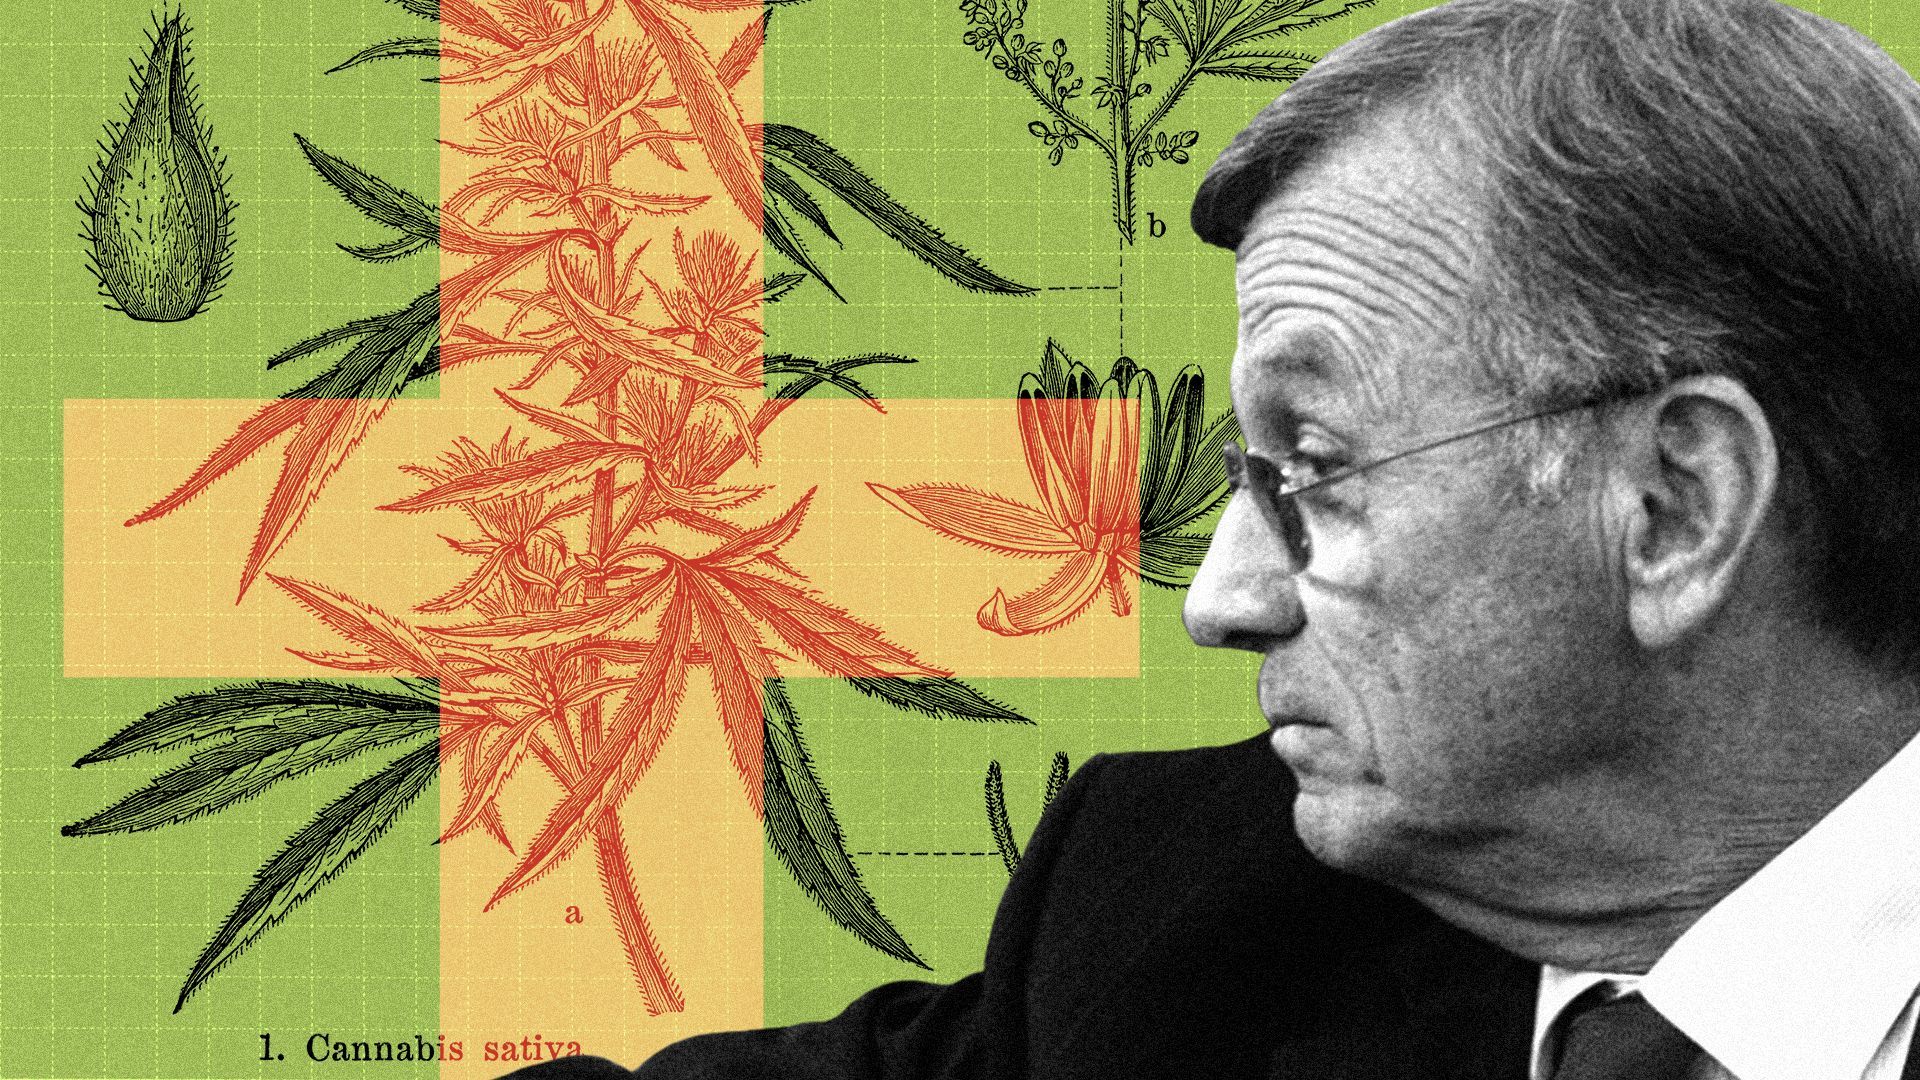 Photo illustration of Senator Bill Rabon and medical drawings of cannabis sativa and abstract shapes in the background.